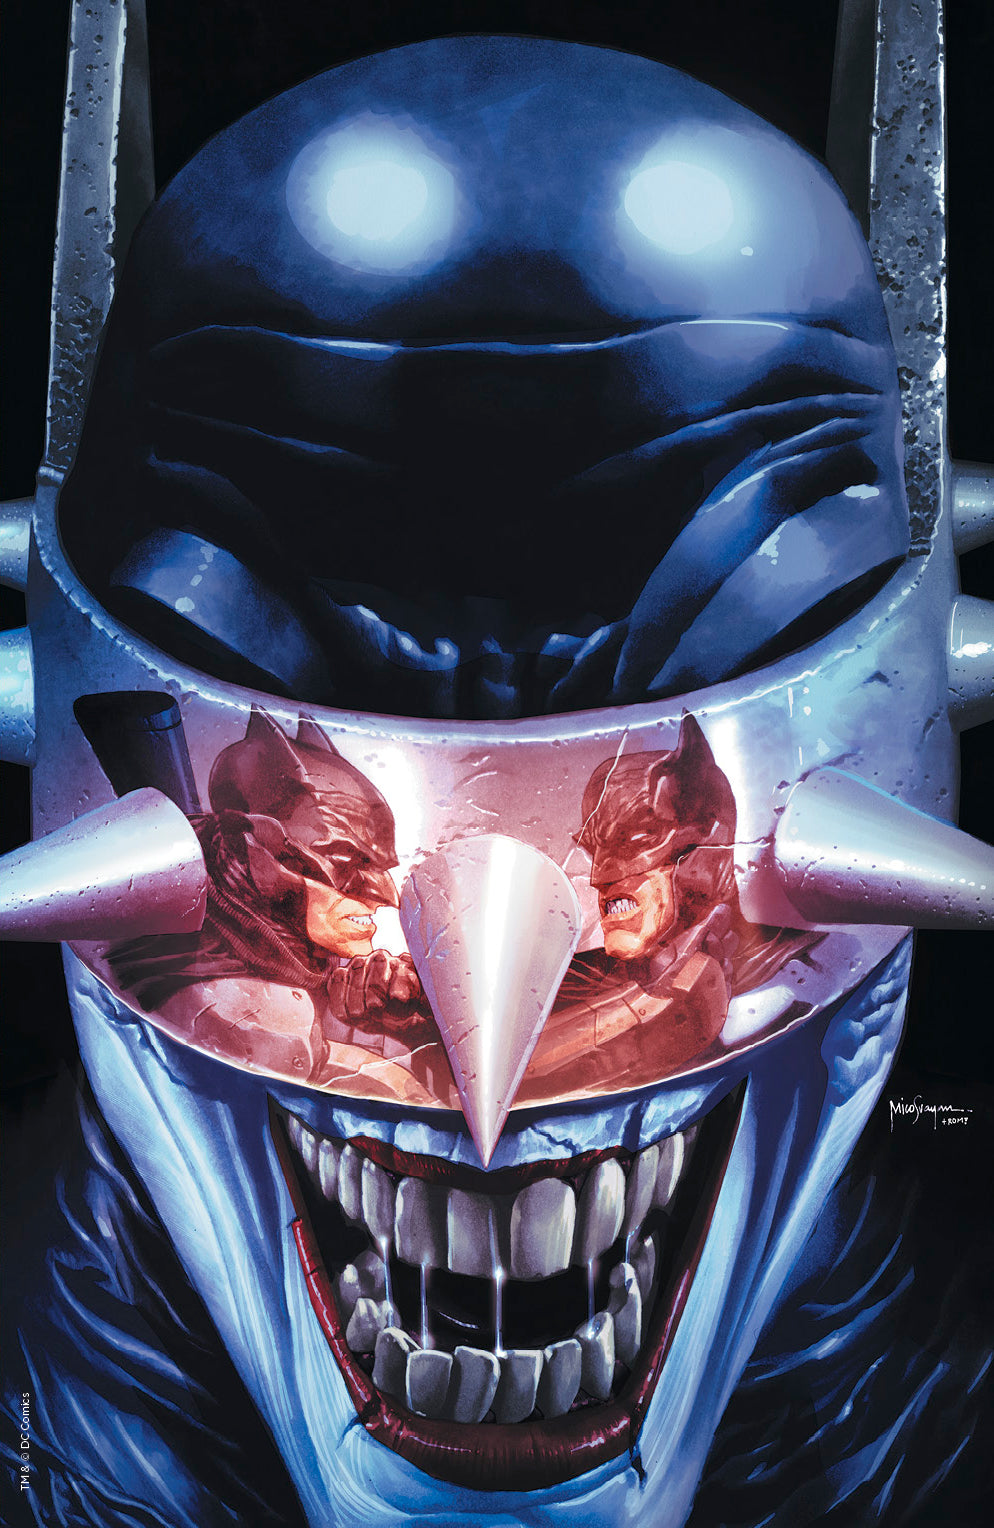 BATMAN WHO LAUGHS #5 (OF 6) UNKNOWN COMIC BOOKS SUAYAN EXCLUSIVE LMTD VIRGIN REFLECTION 5/8/2019